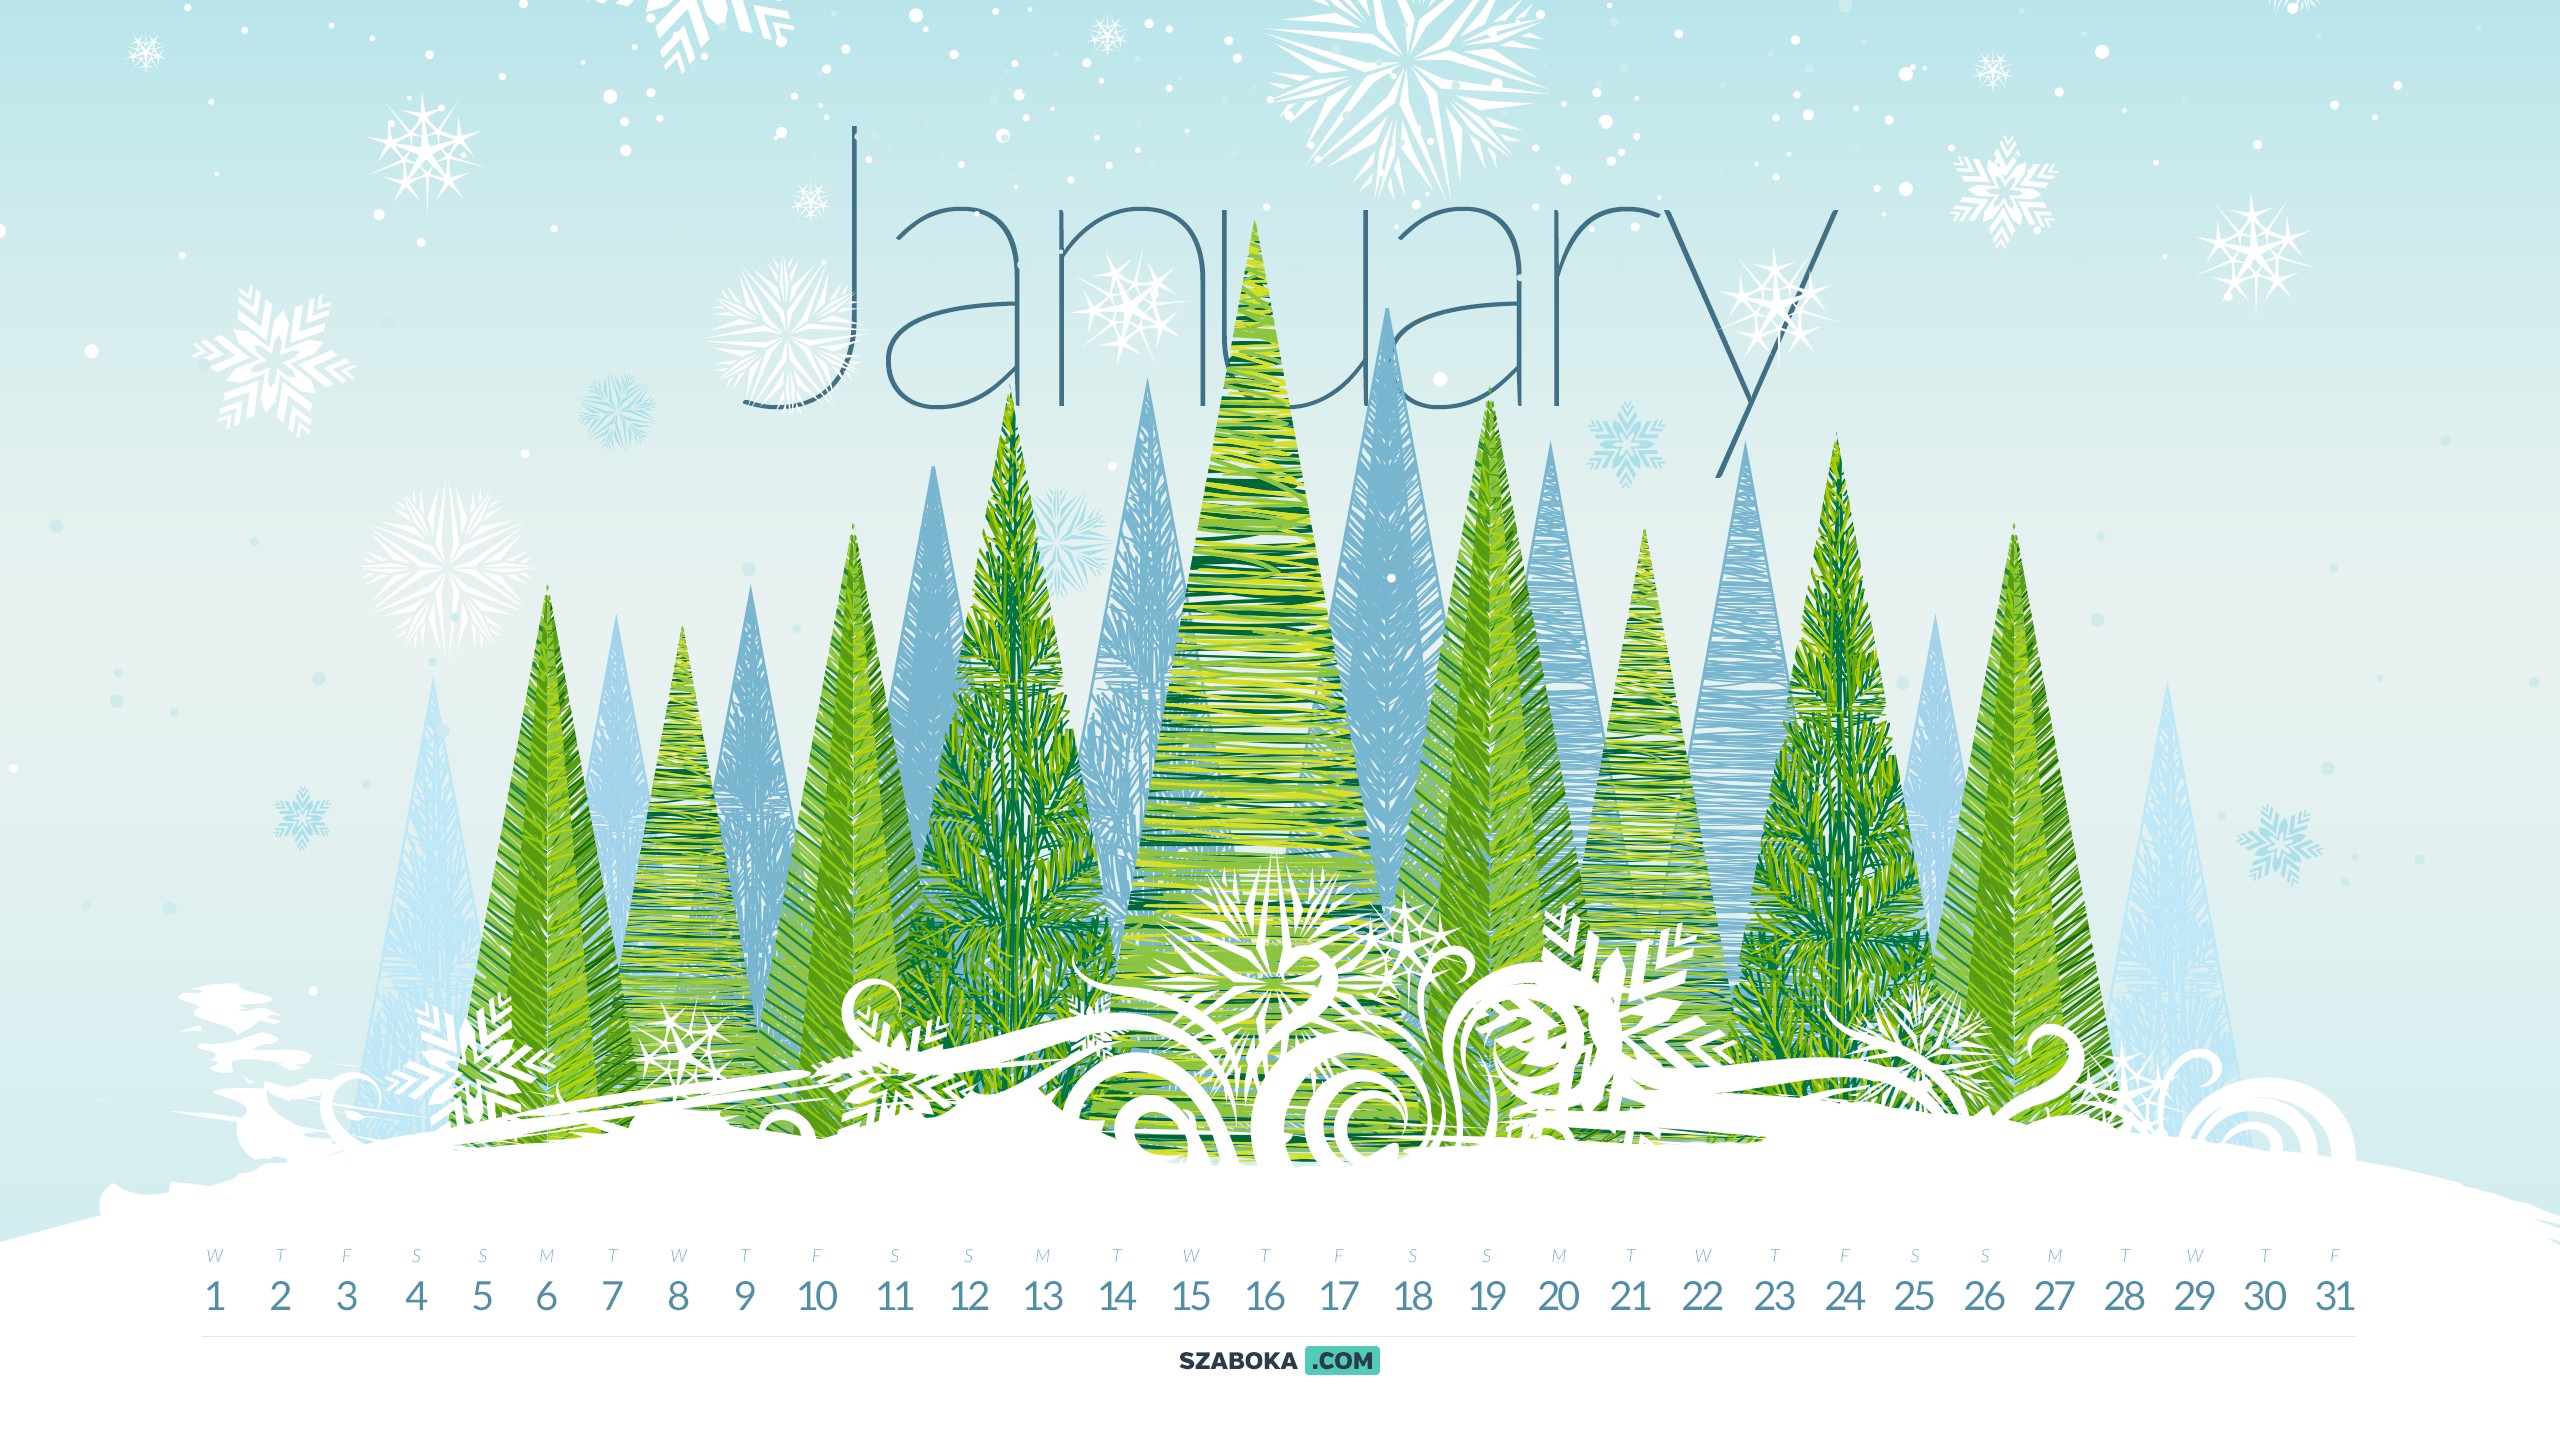 20 Best desktop wallpapers january You Can Save It free - Aesthetic Arena